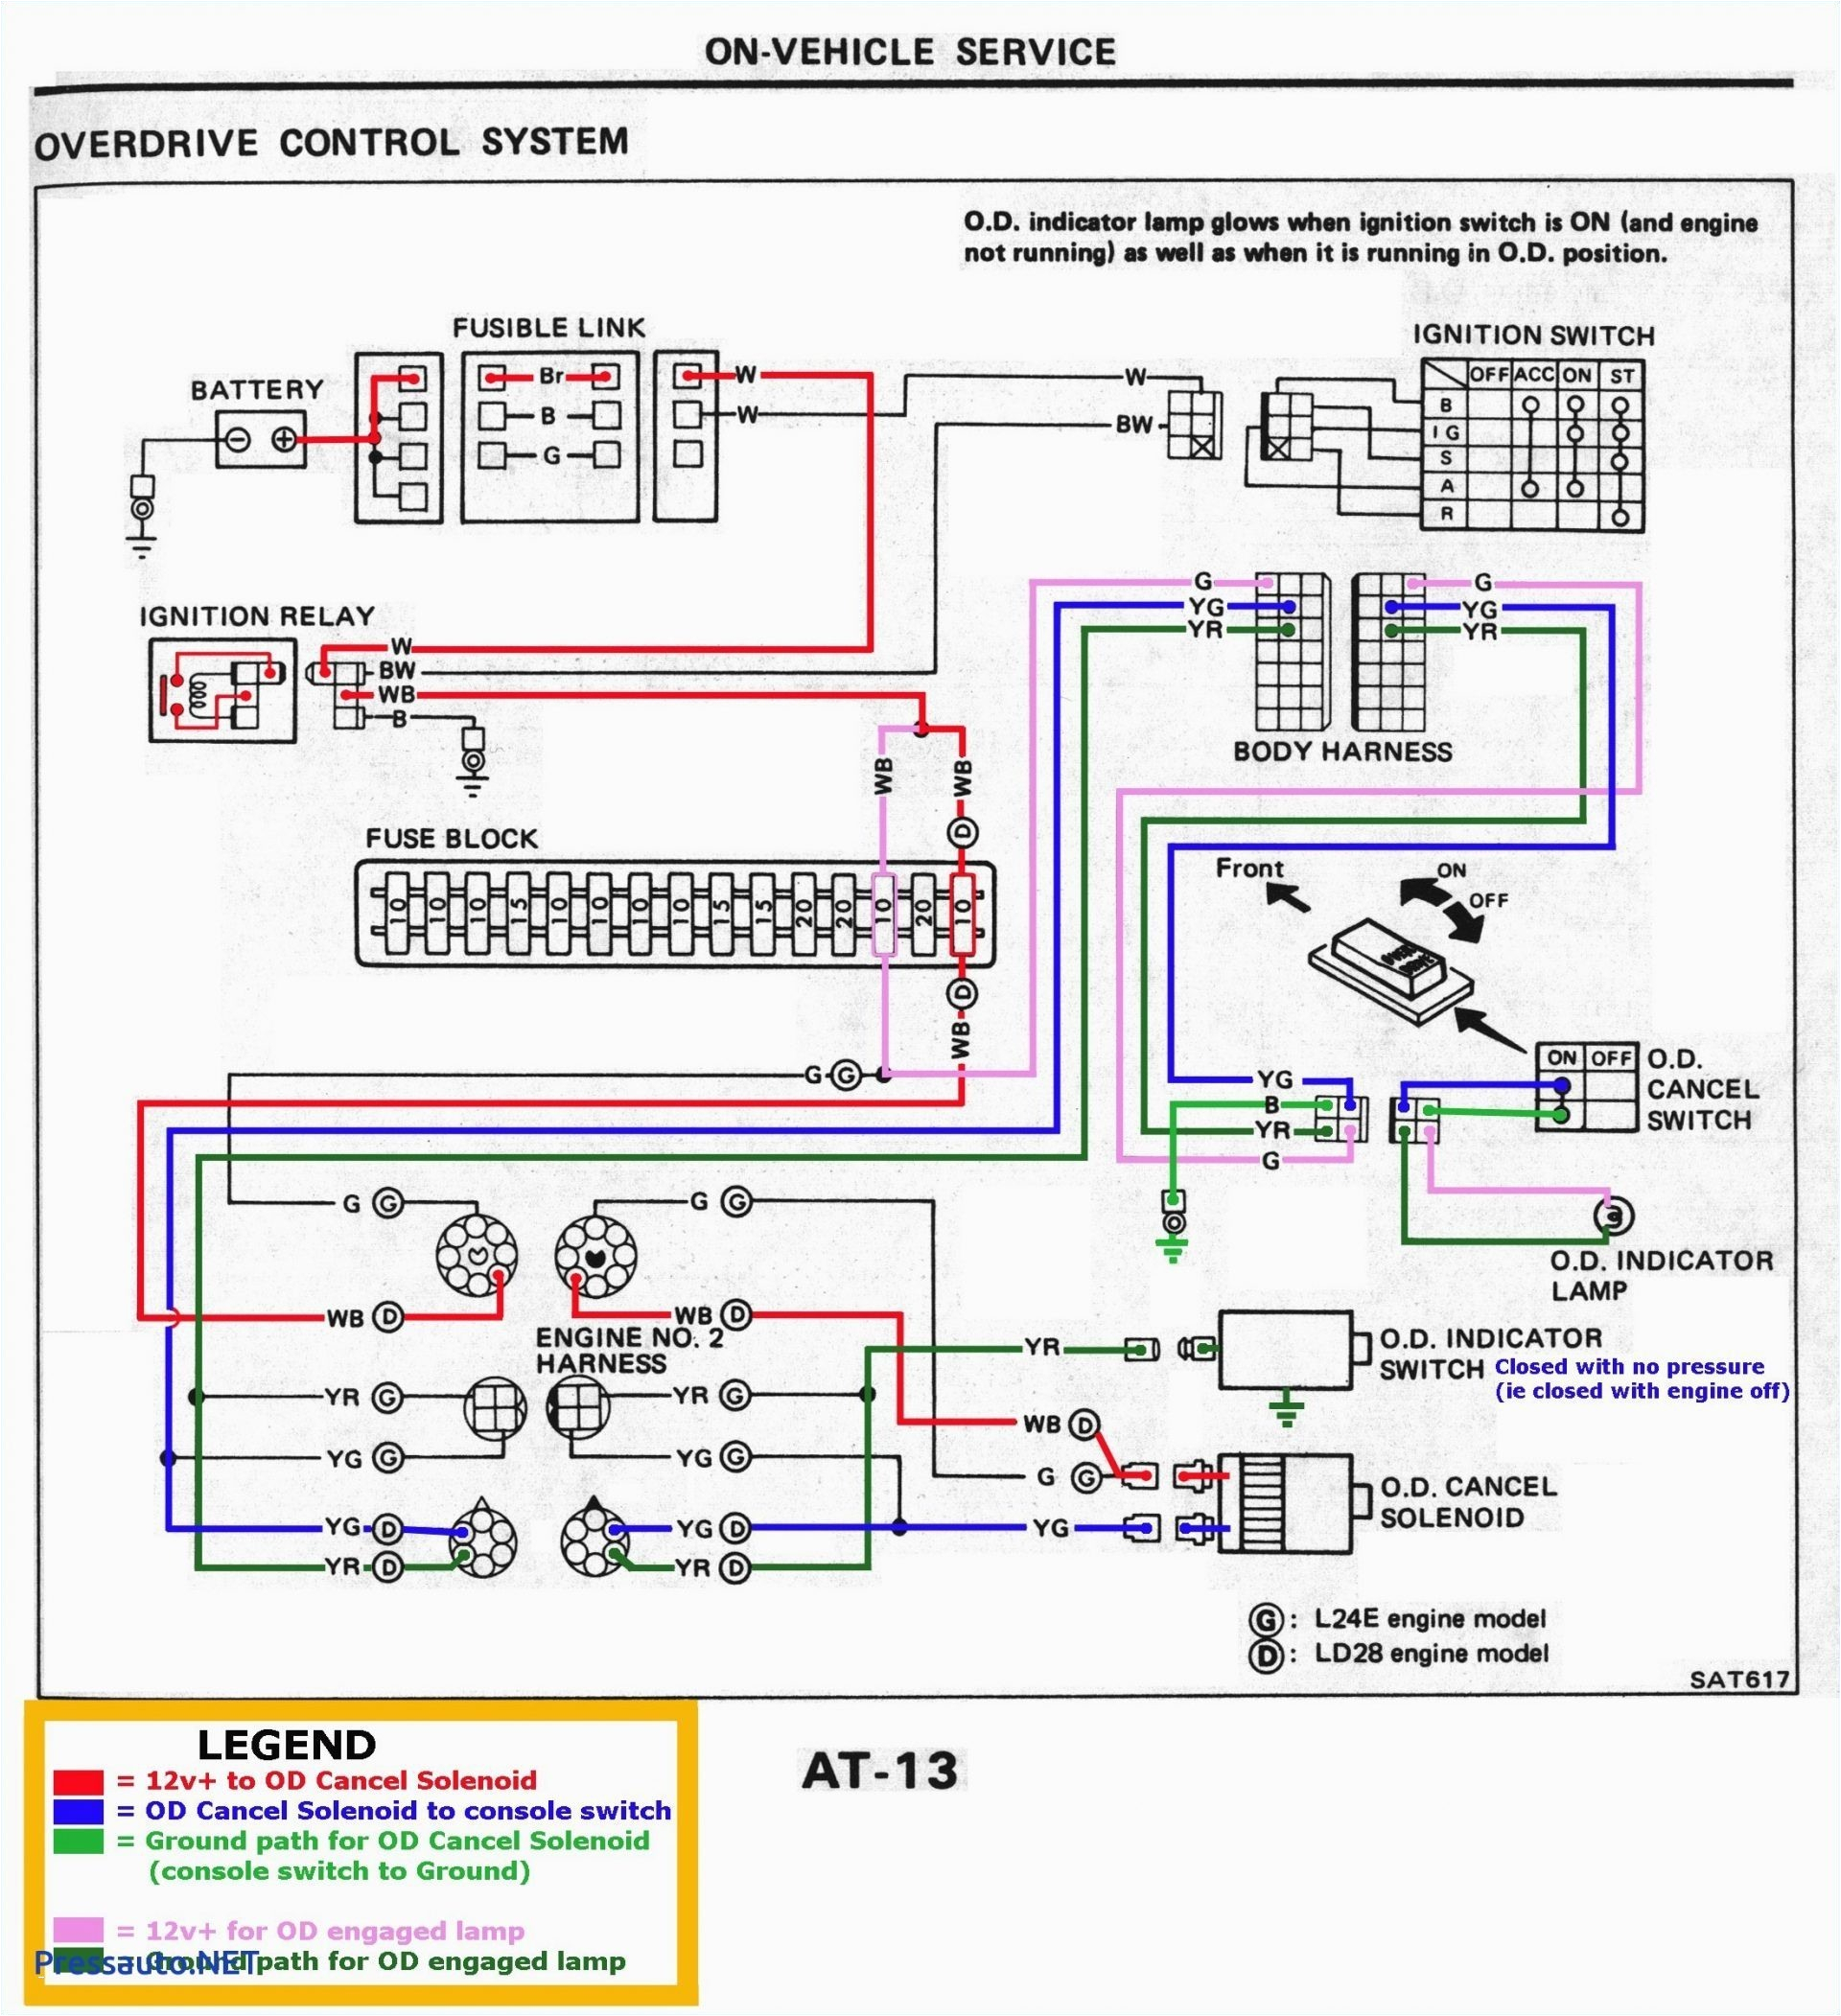 wire diagram for 1995 kenworth w900 cat 3406 wiring library lamp wiring diagram polarized wiring diagram